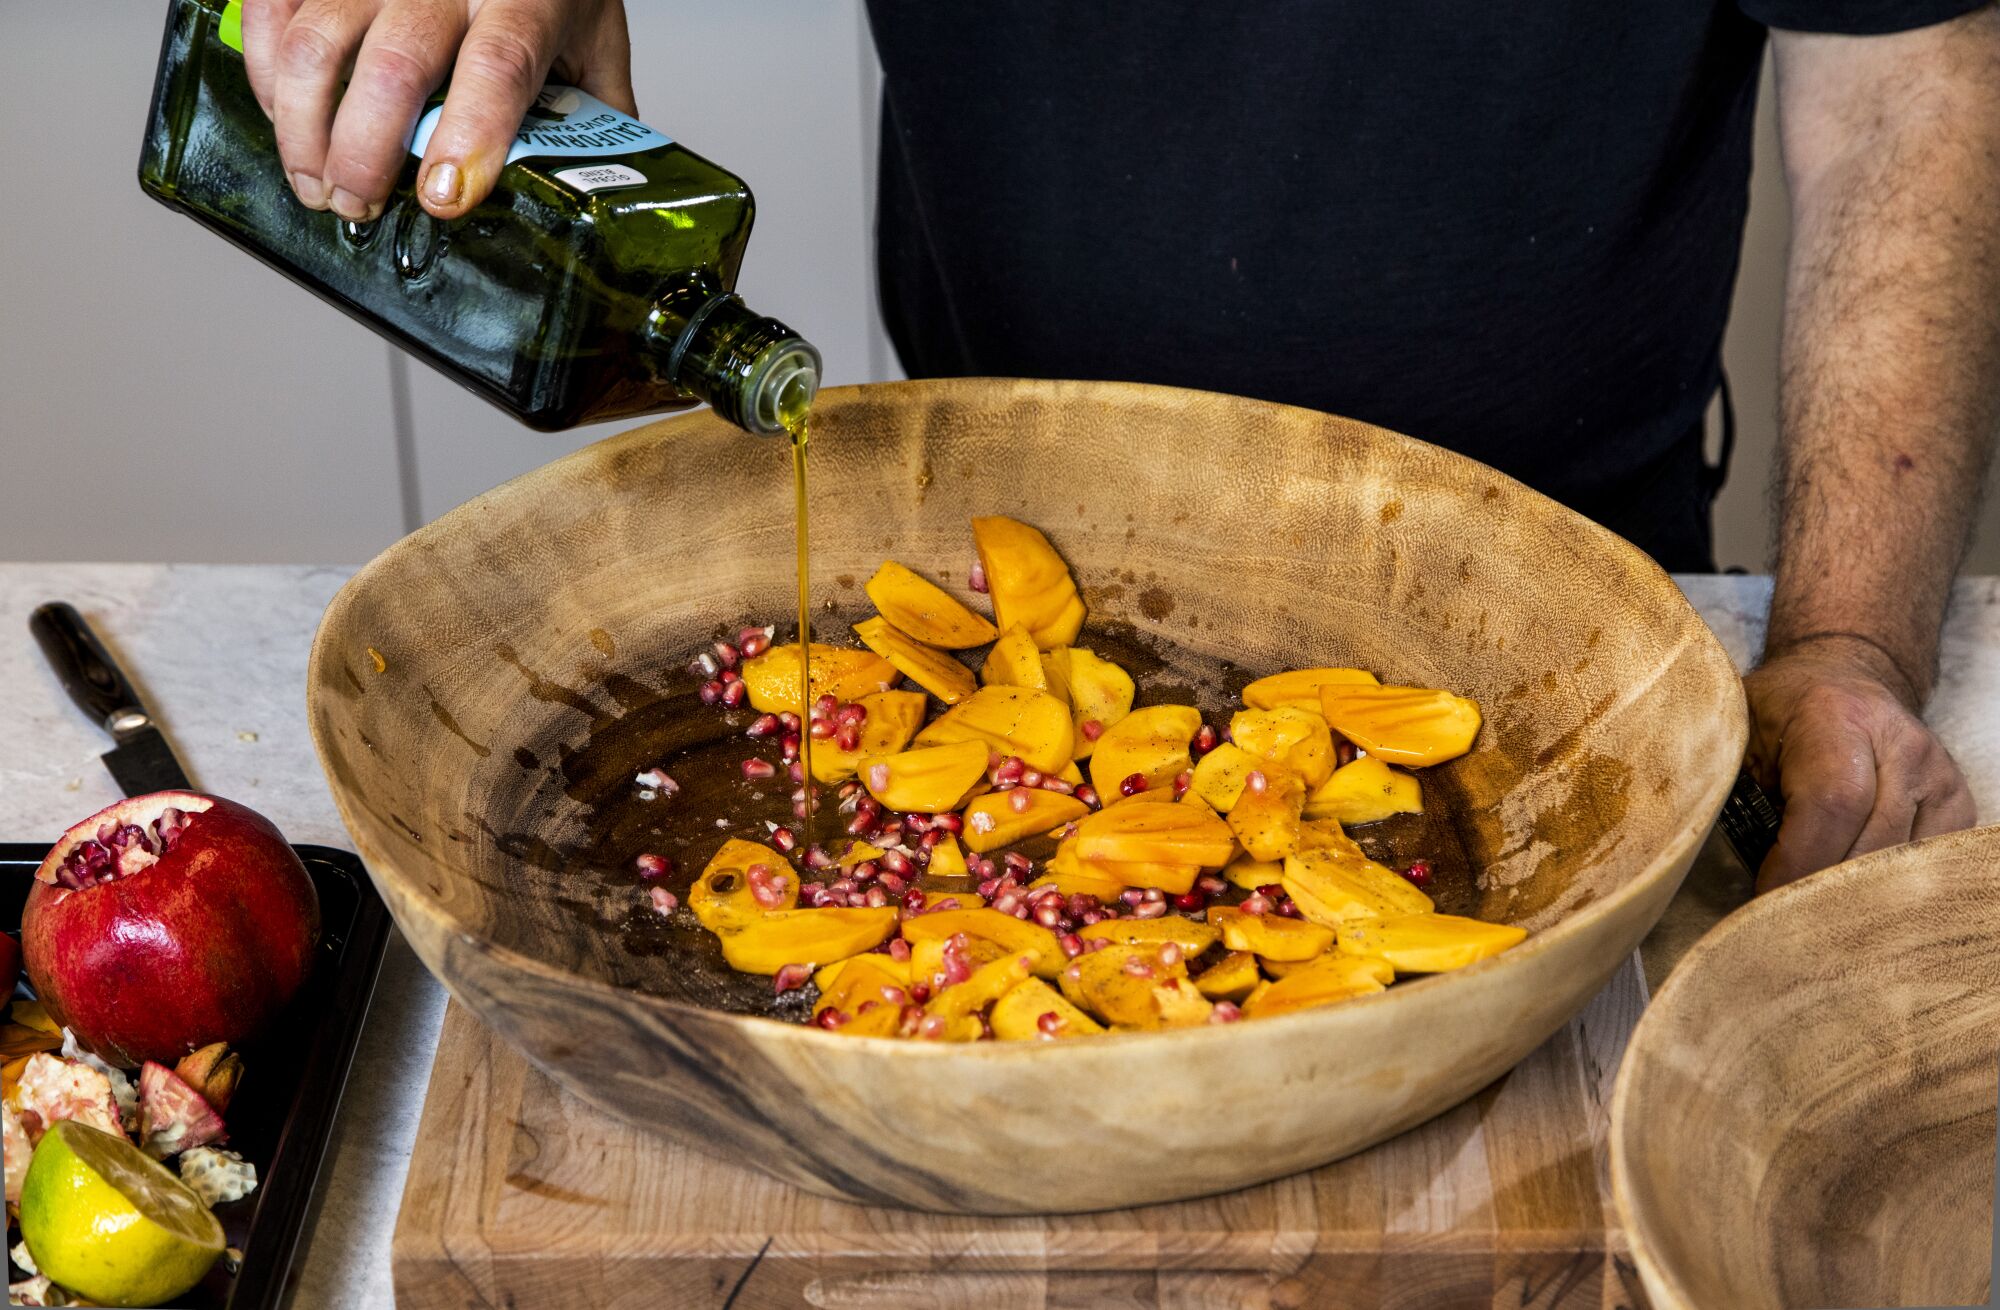 Olive oil is added to a pomegranate and persimmon salad with lettuce.